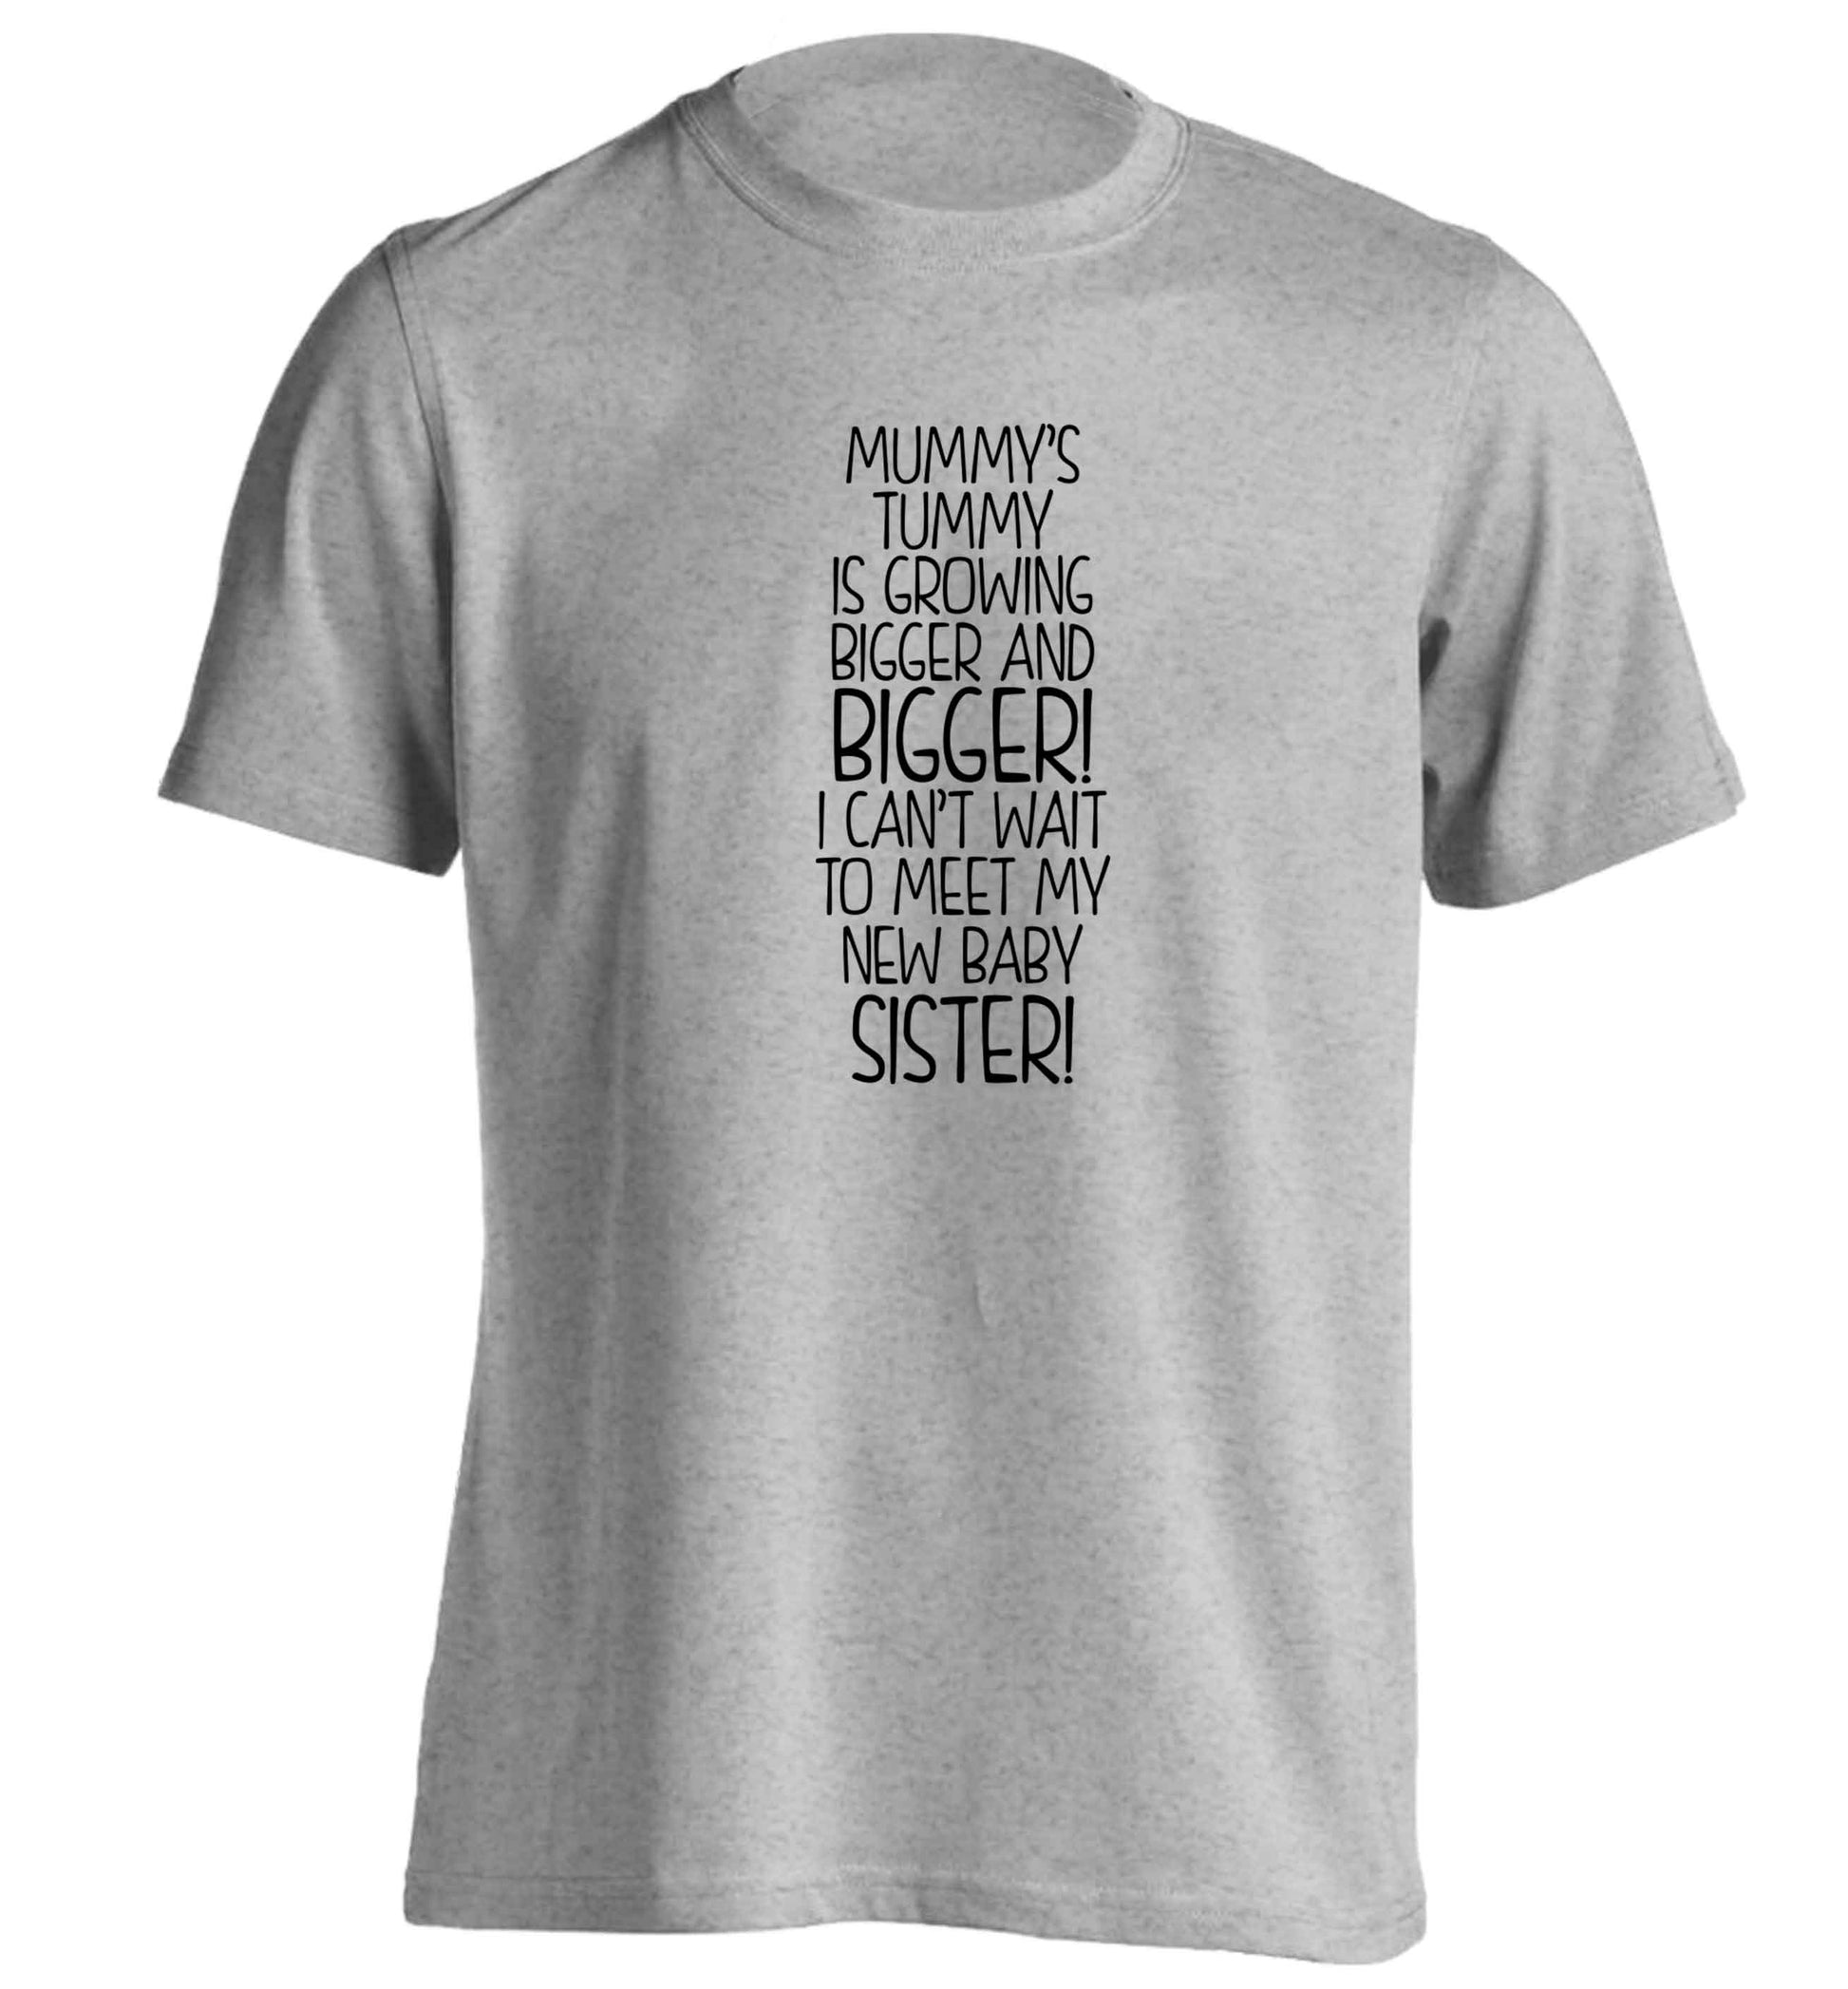 Mummy's tummy is growing bigger and bigger I can't wait to meet my new baby sister! adults unisex grey Tshirt 2XL